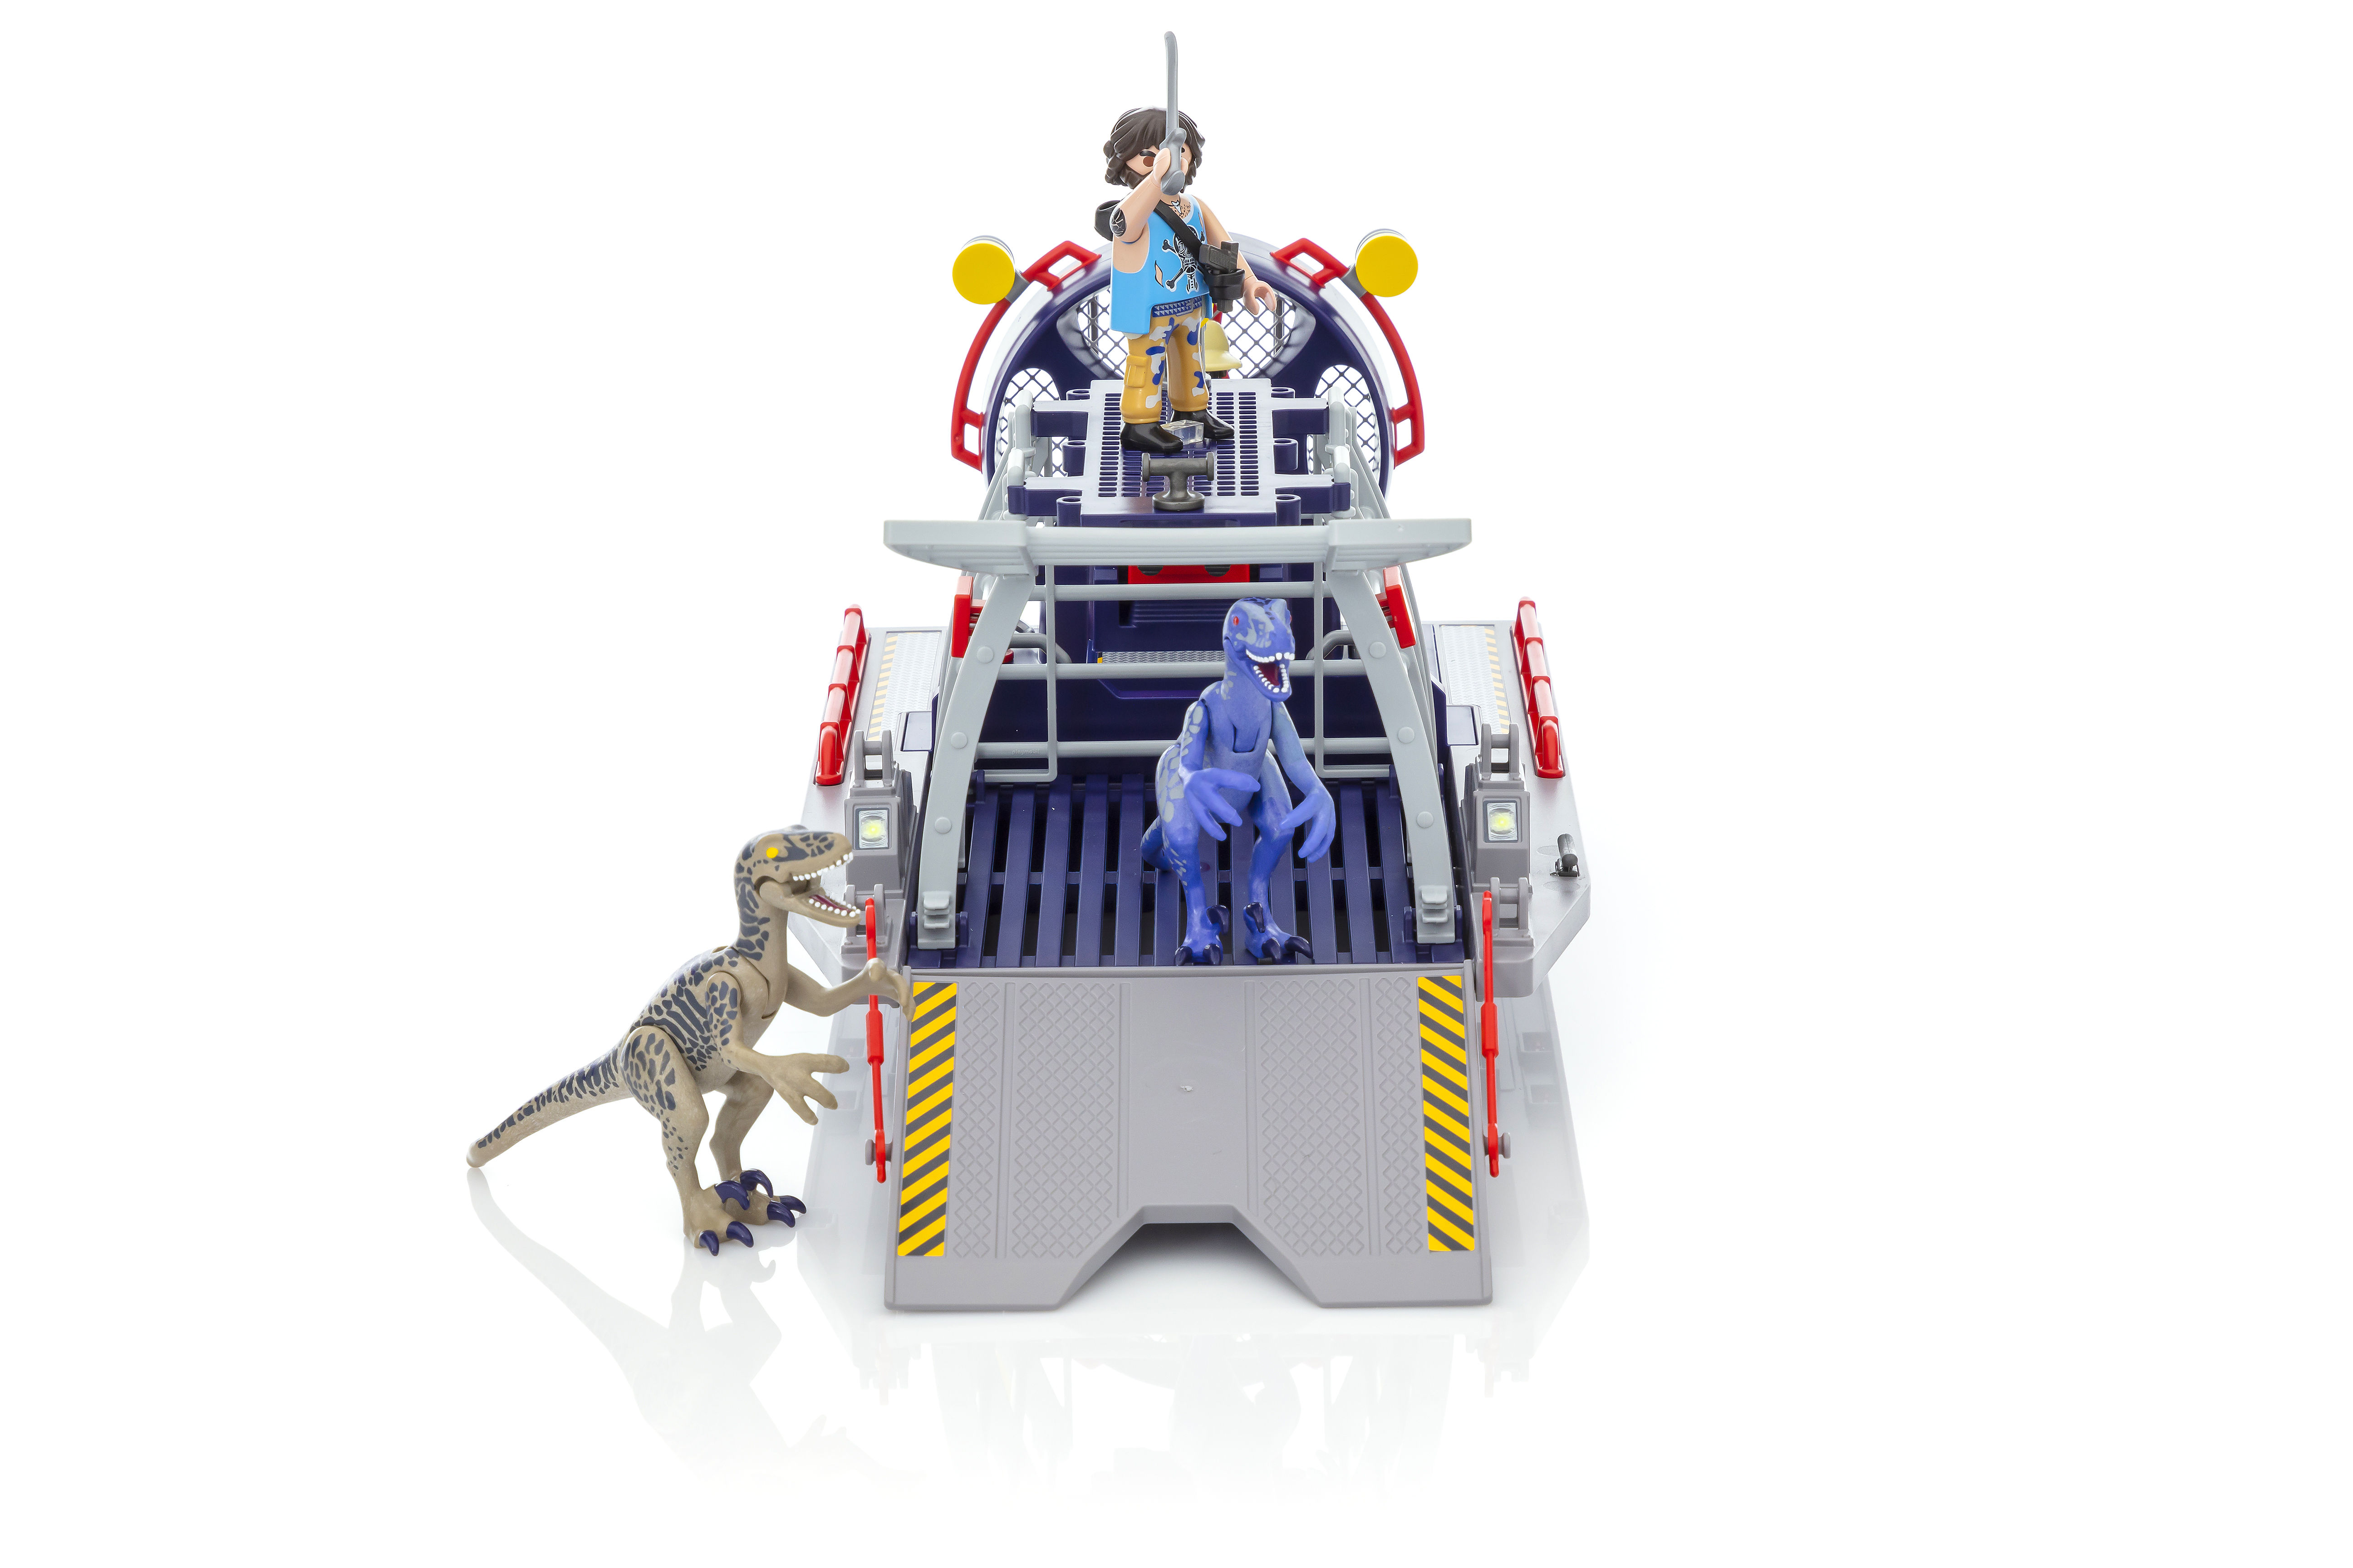  PLAYMOBIL Enemy Airboat with Raptor Building Set